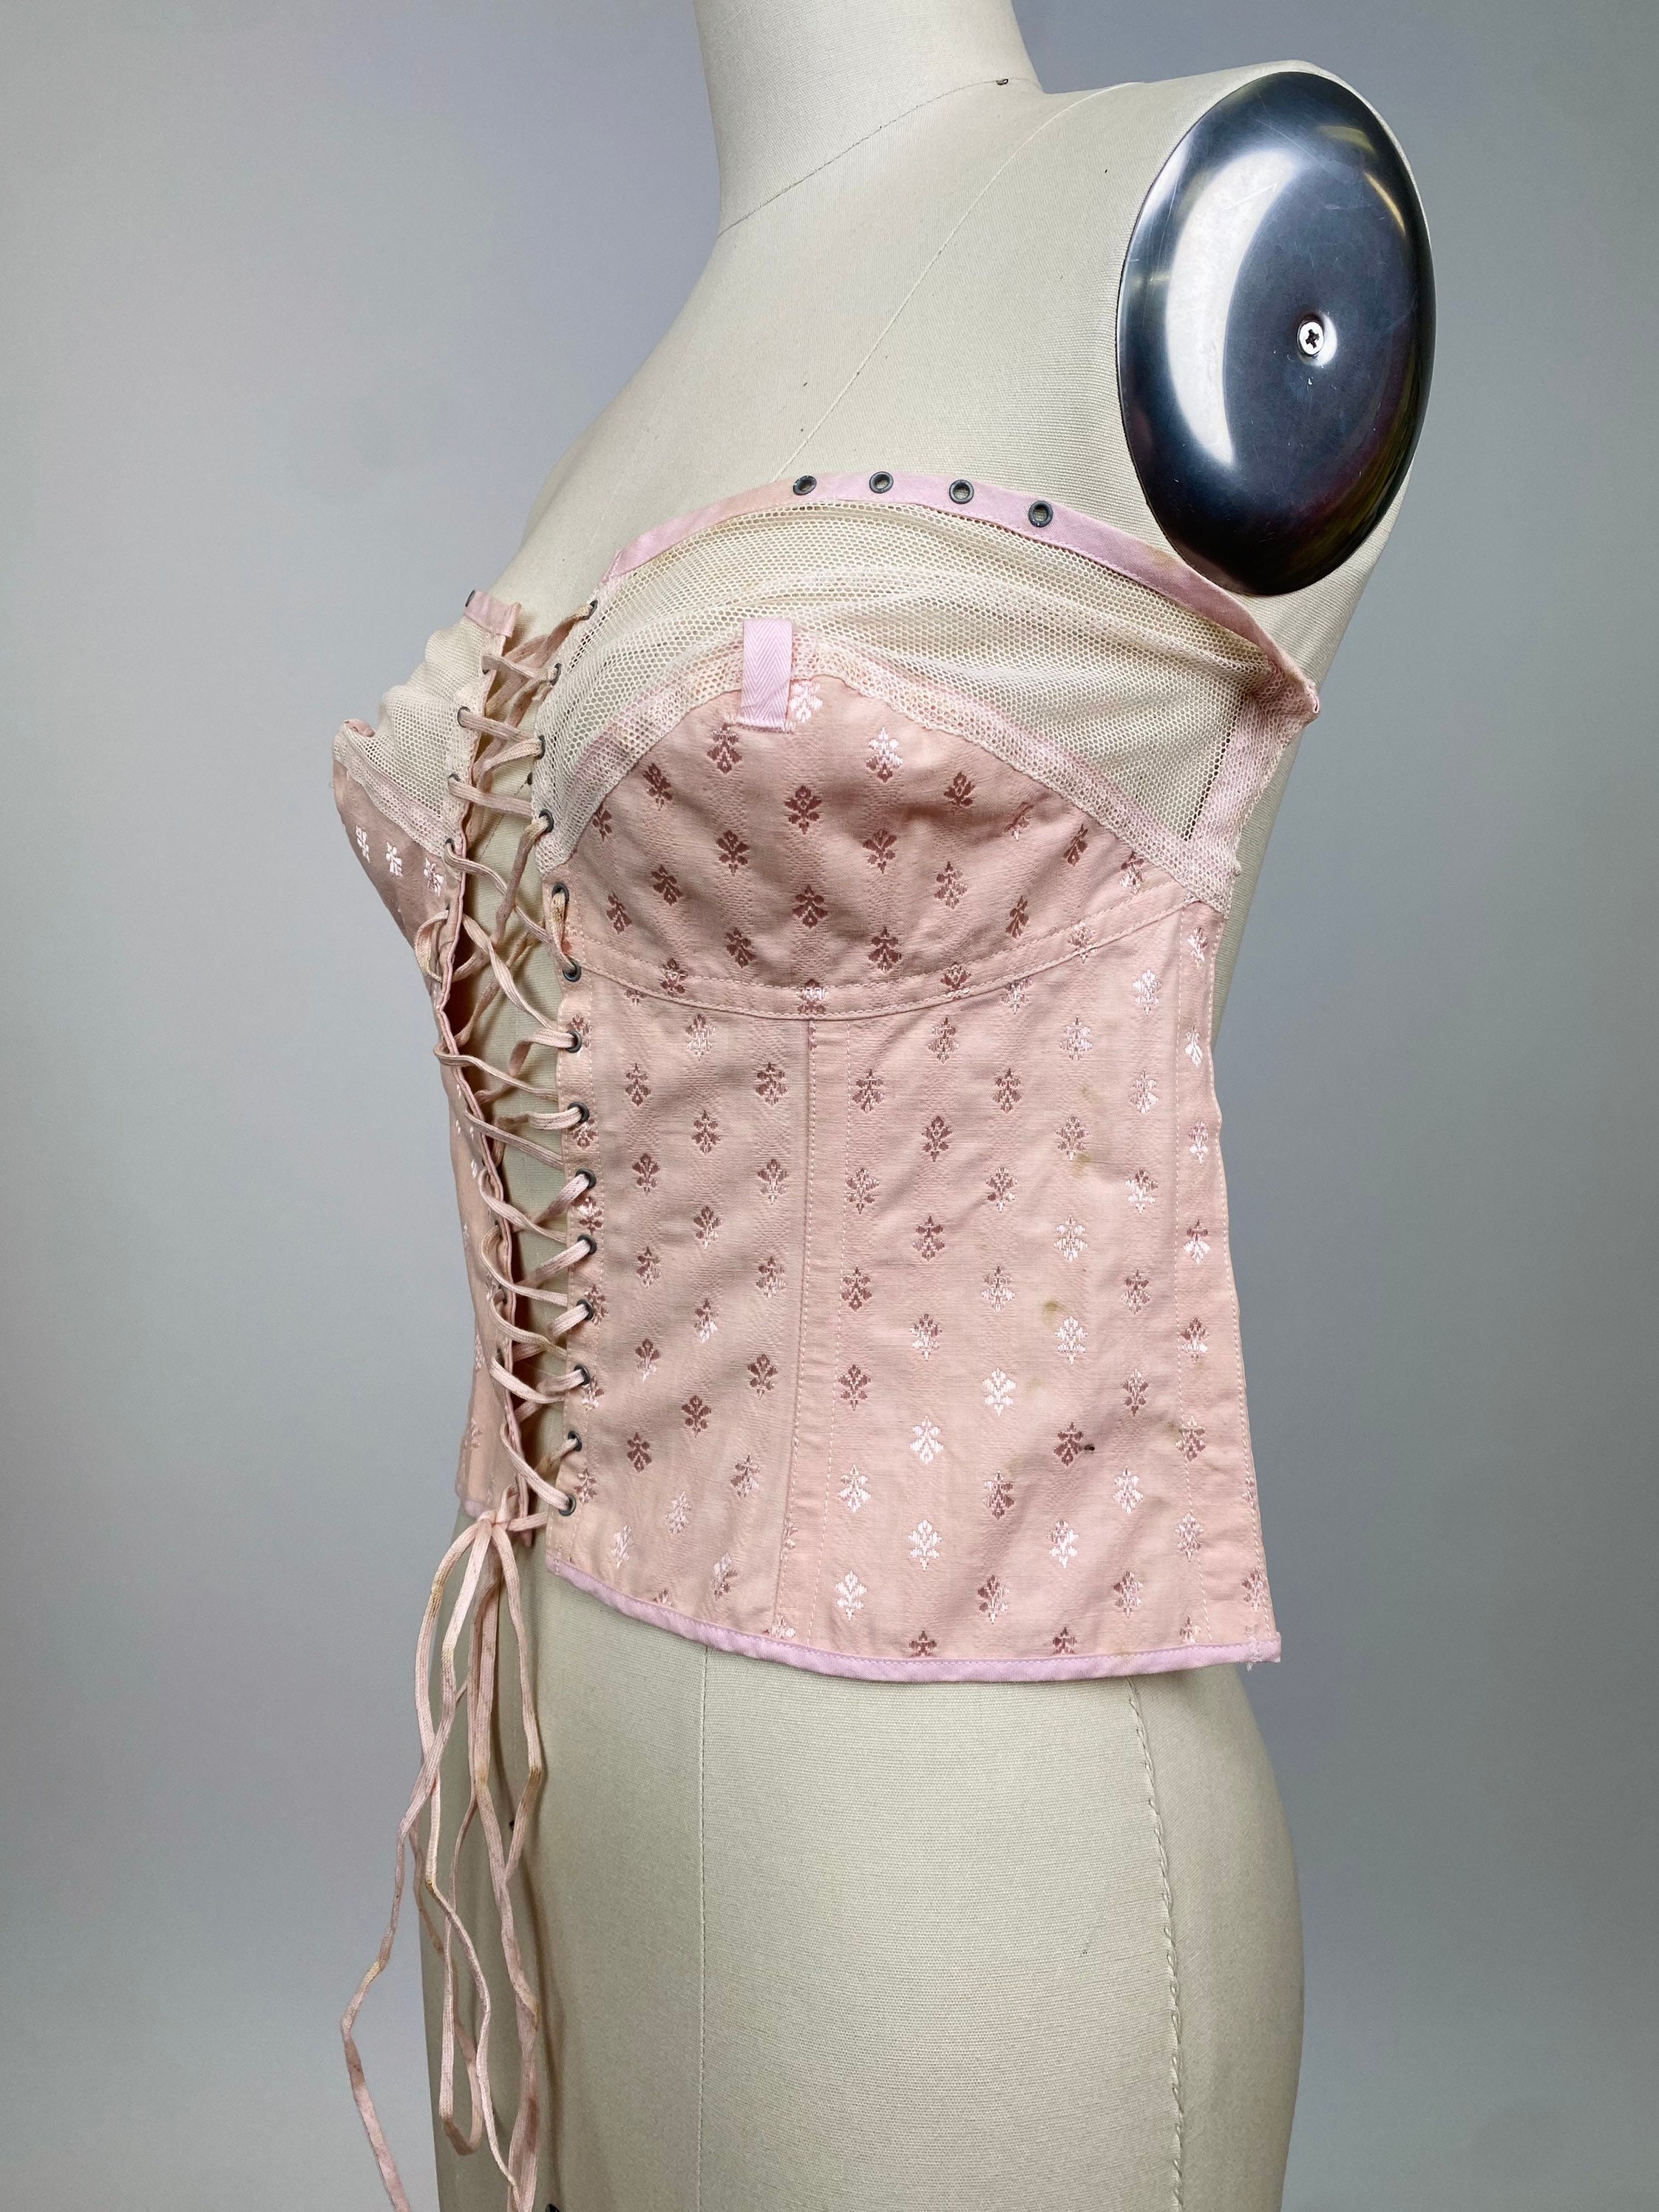 Rare Vintage Early 1900s Spirella Corset, Bustier, Lace up Undergarment  With Original Cover, Size Slender, Body Shaper, Pale Blush Pink -   Canada